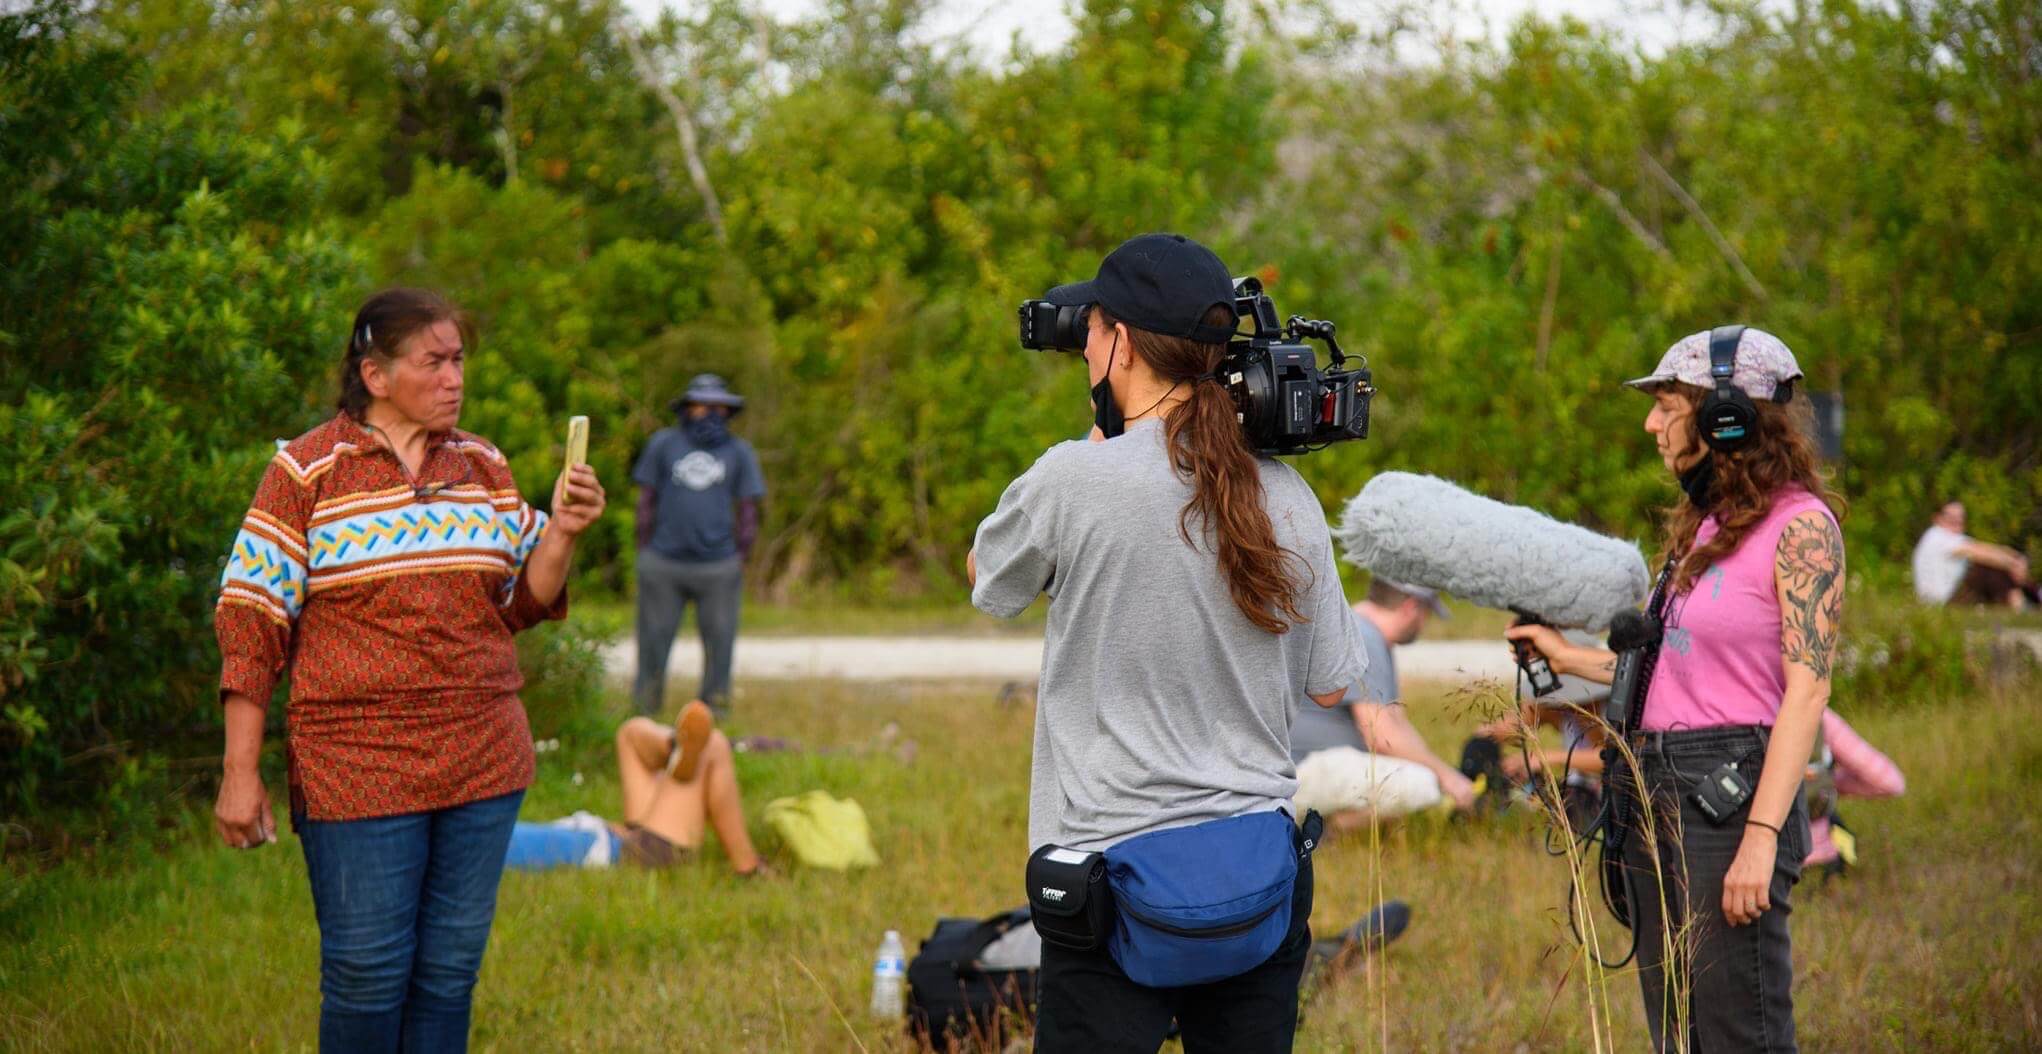 Jesse and Sasha document Betty during an action she is leading in the Big Cypress in an open green field